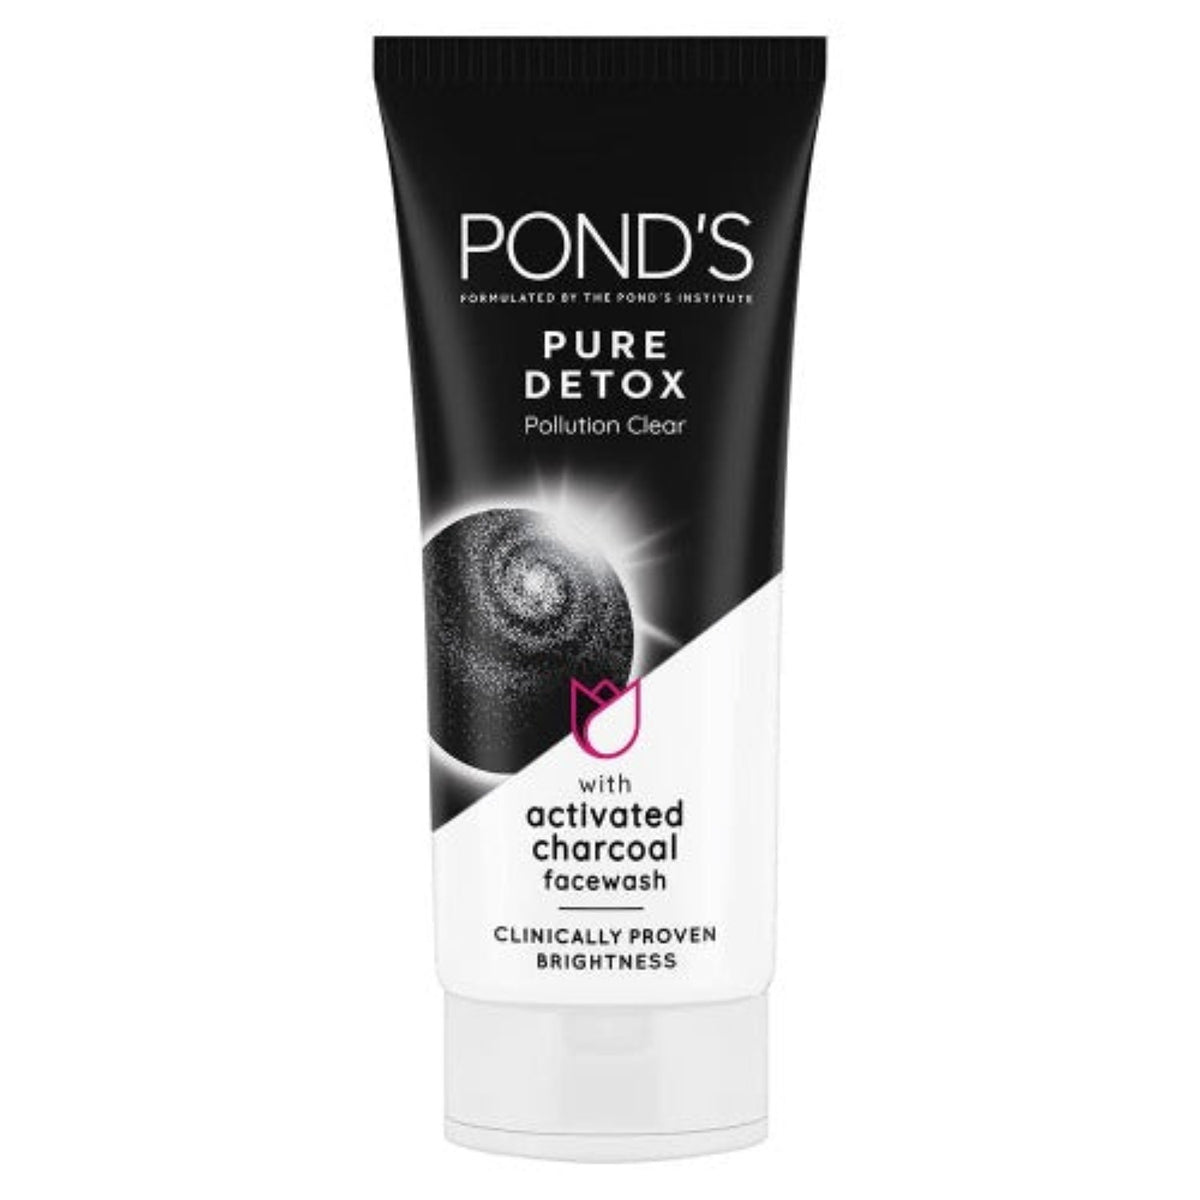 POND'S Pure Detox Face Wash Daily Exfoliating & Brightening Cleanser Deep Cleans Oily Skin With Activated Charcoal for Fresh Glowing Skin